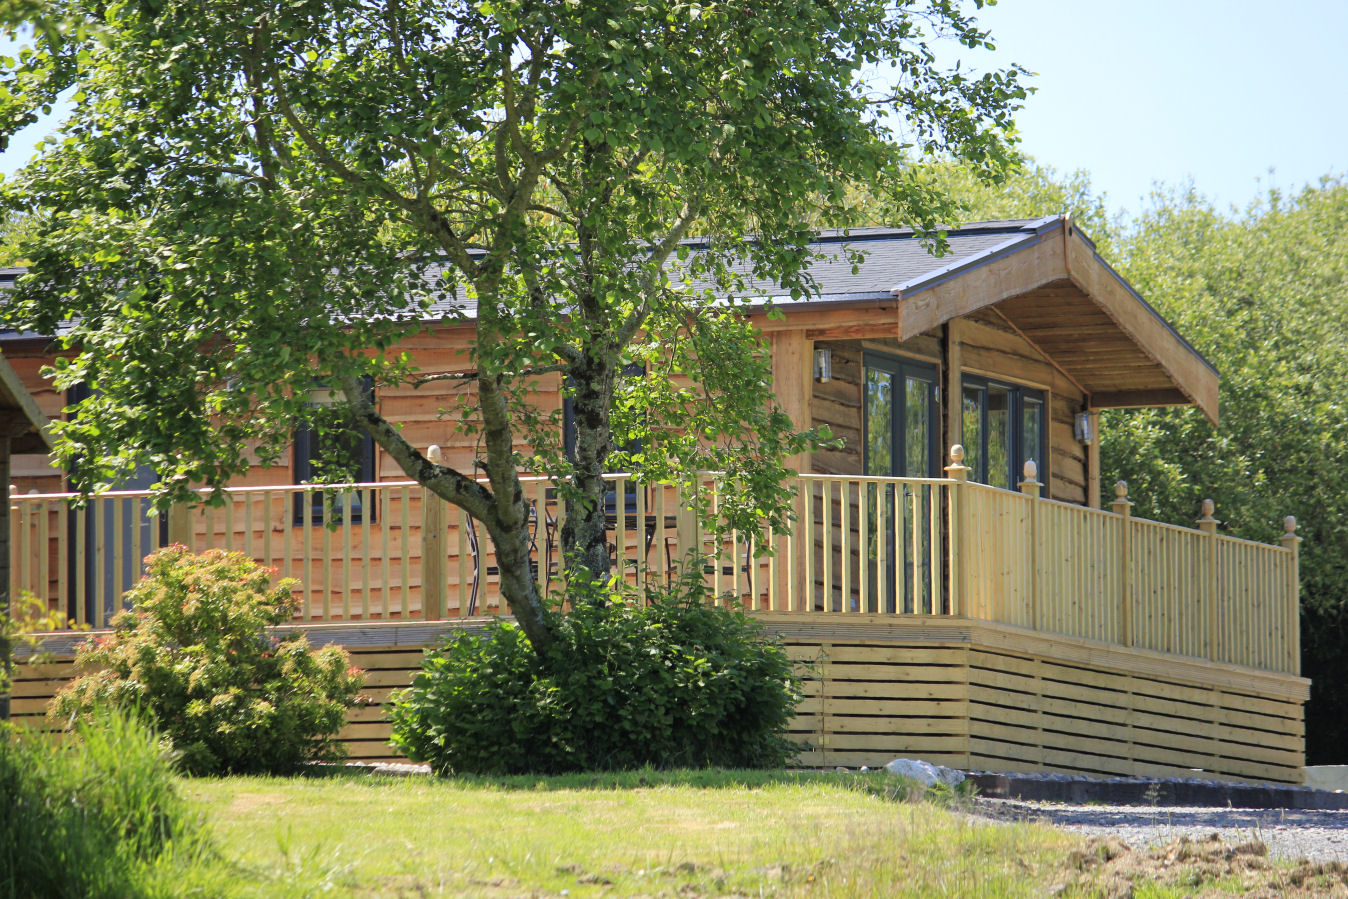 Maple lodge, one of our second hand lodges for sale.